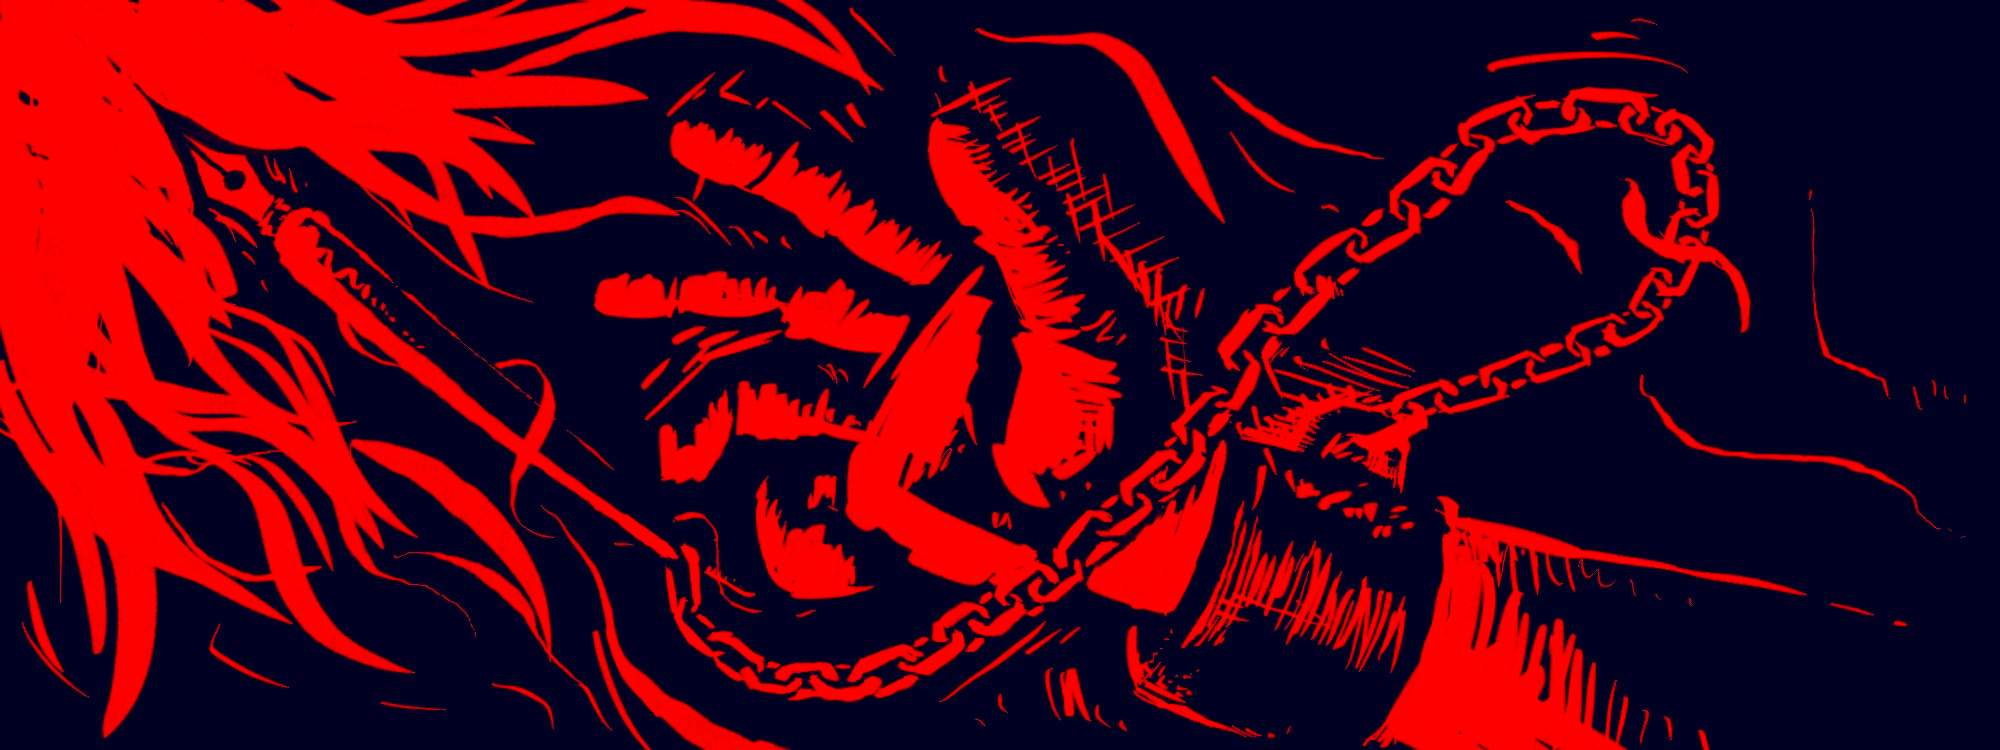 Illustration of a hand reaching for a pen that it is also shackled to with a long chain. The pen is drawing the hand toward a bright set of abstract tendrils. Red and black colours in a high-contrast style.